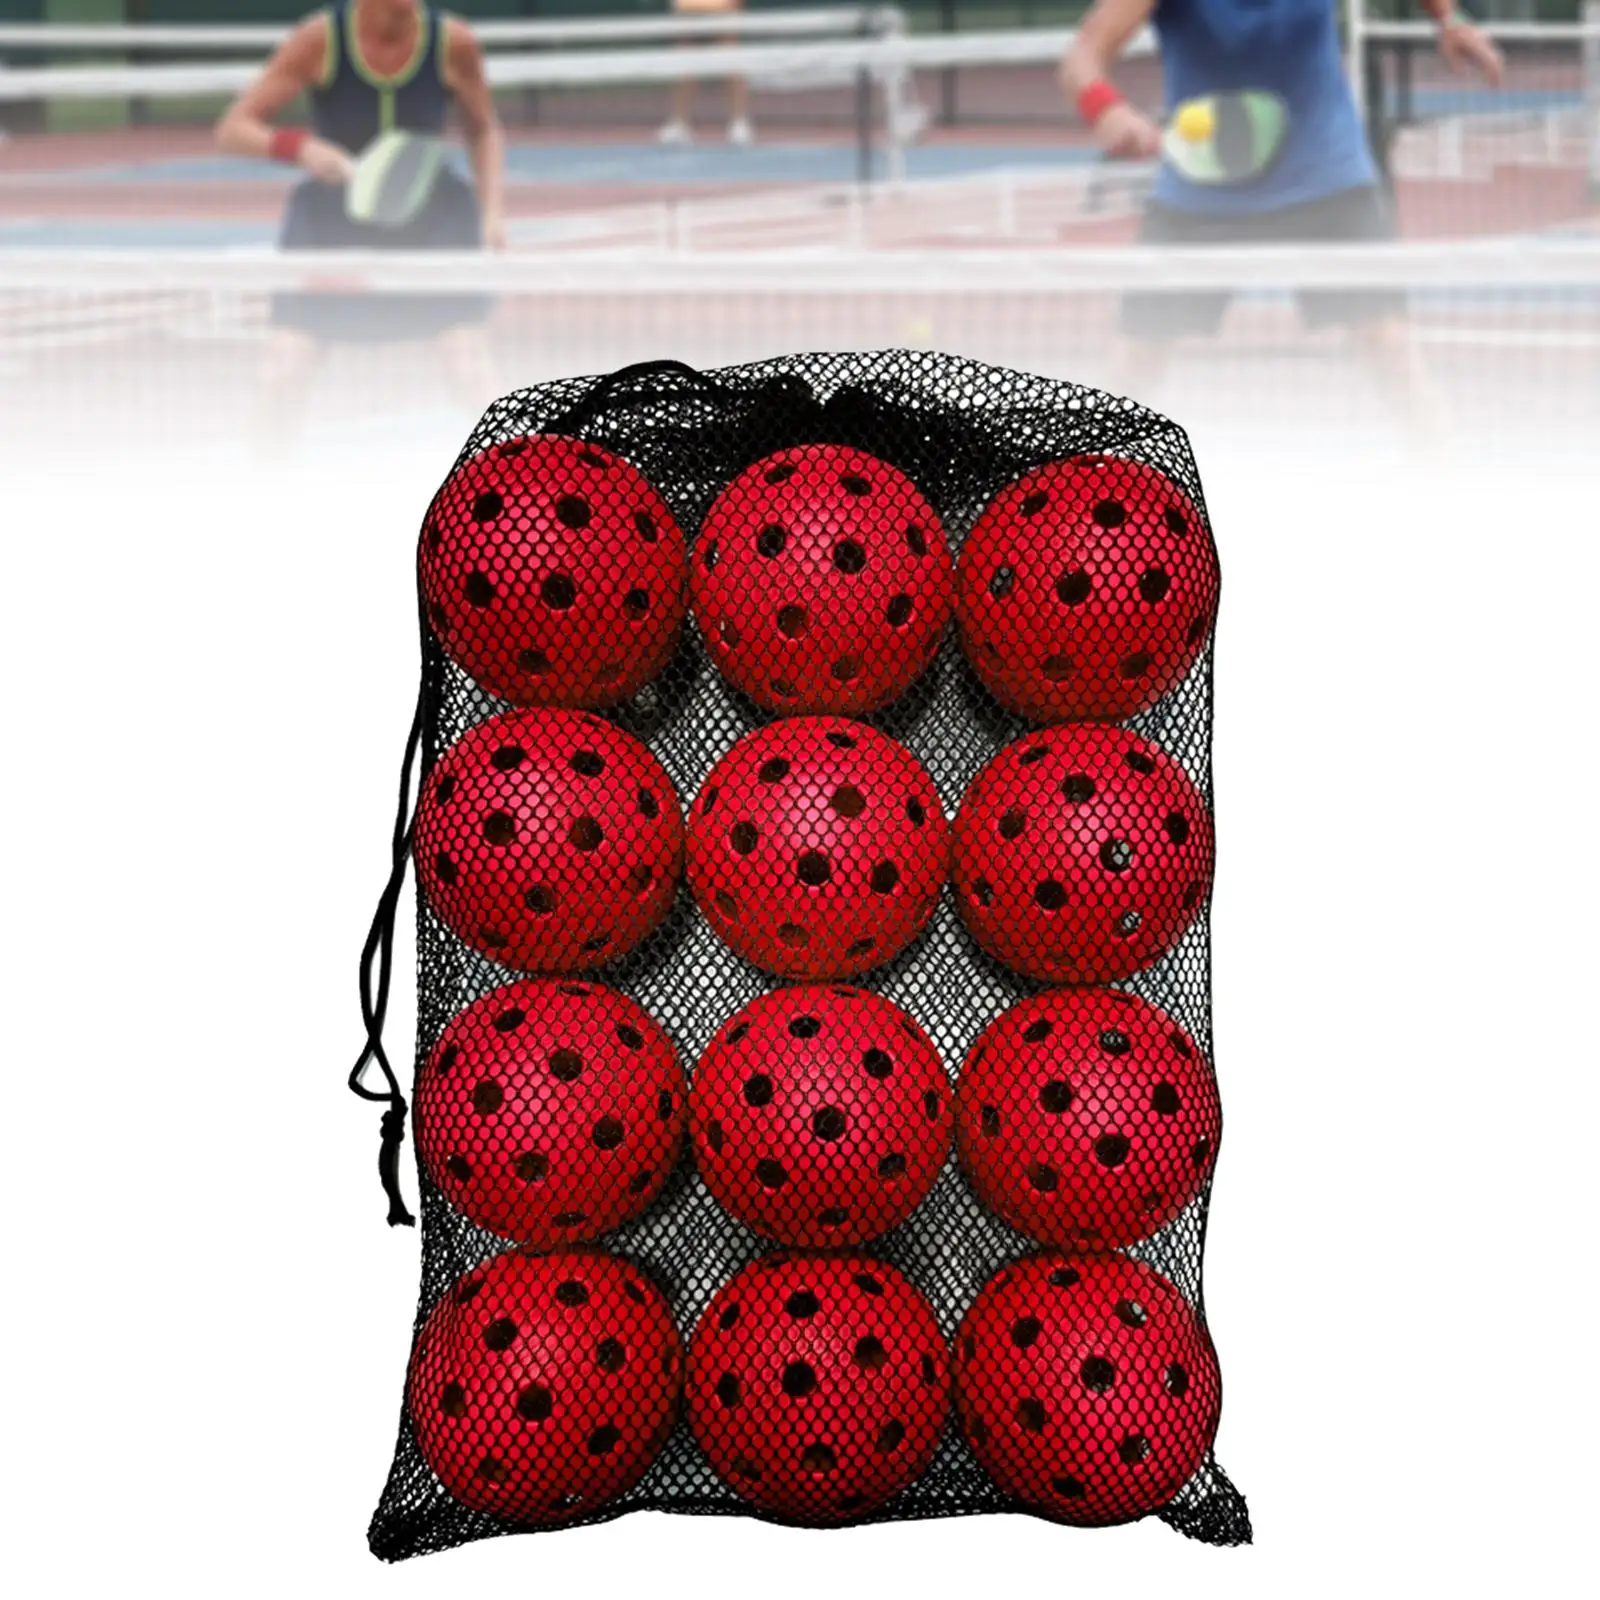 12x Pickleball Balls 40 Holes 74mm Professional Specifically Designed Accessories for Indoor Outdoor Sanctioned Tournament Play